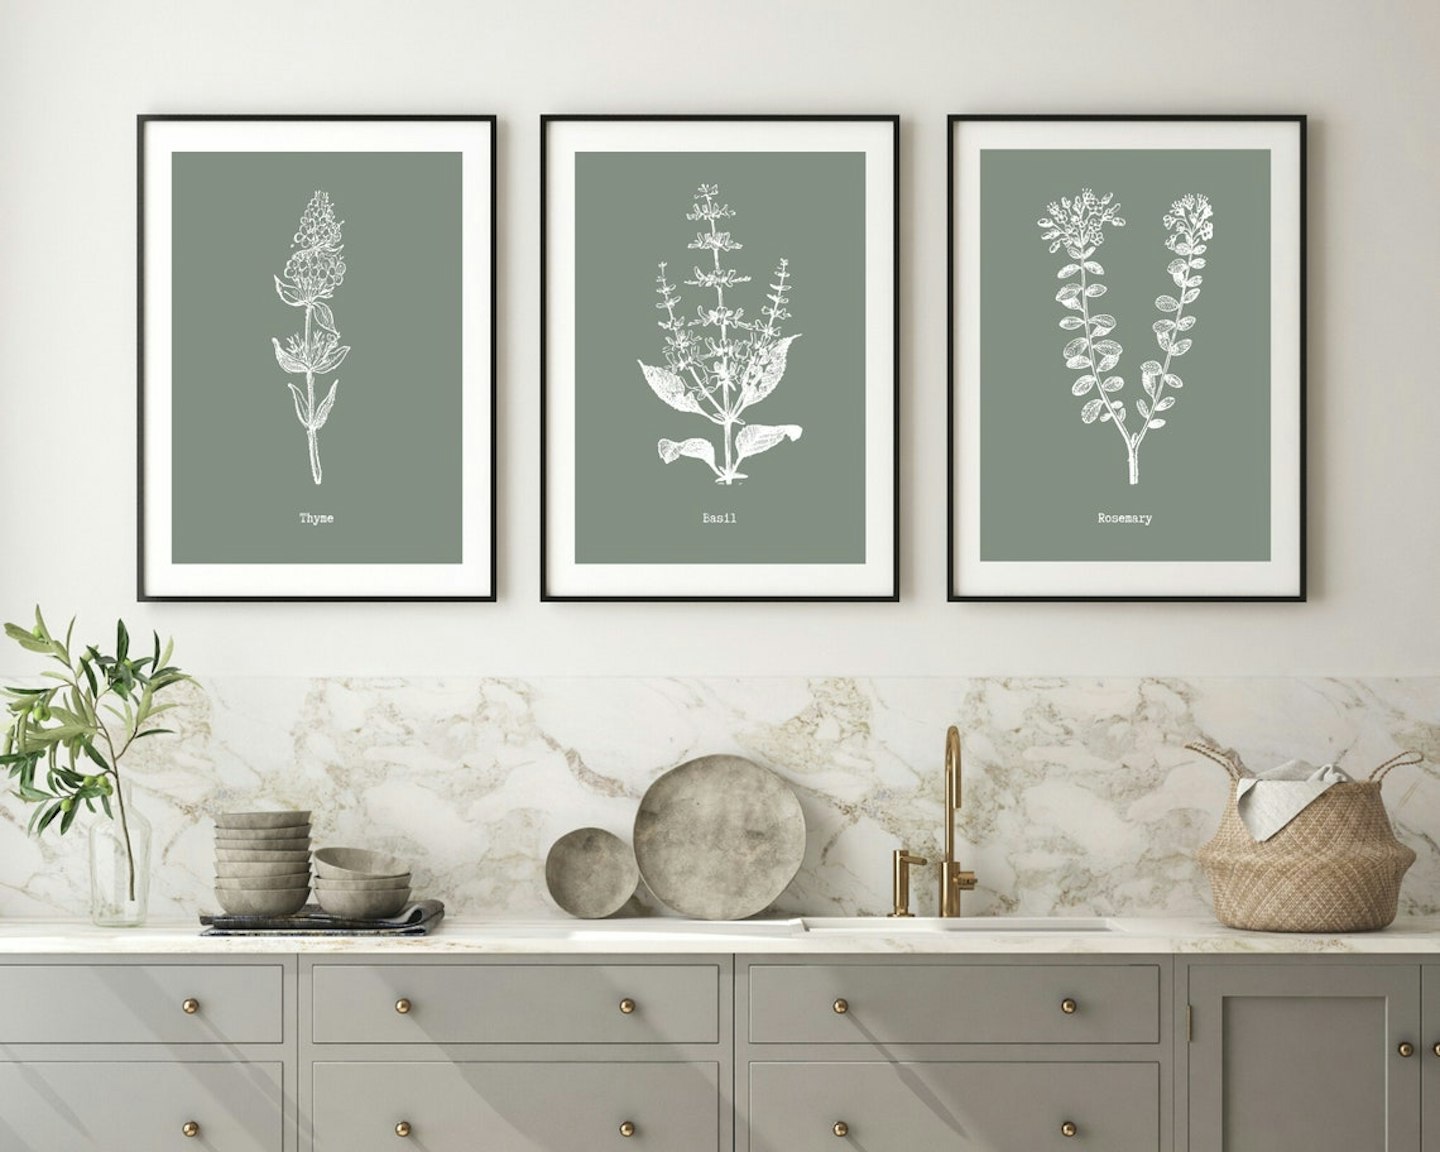 Etsy, Herb Prints Set Of 3, From £12.50